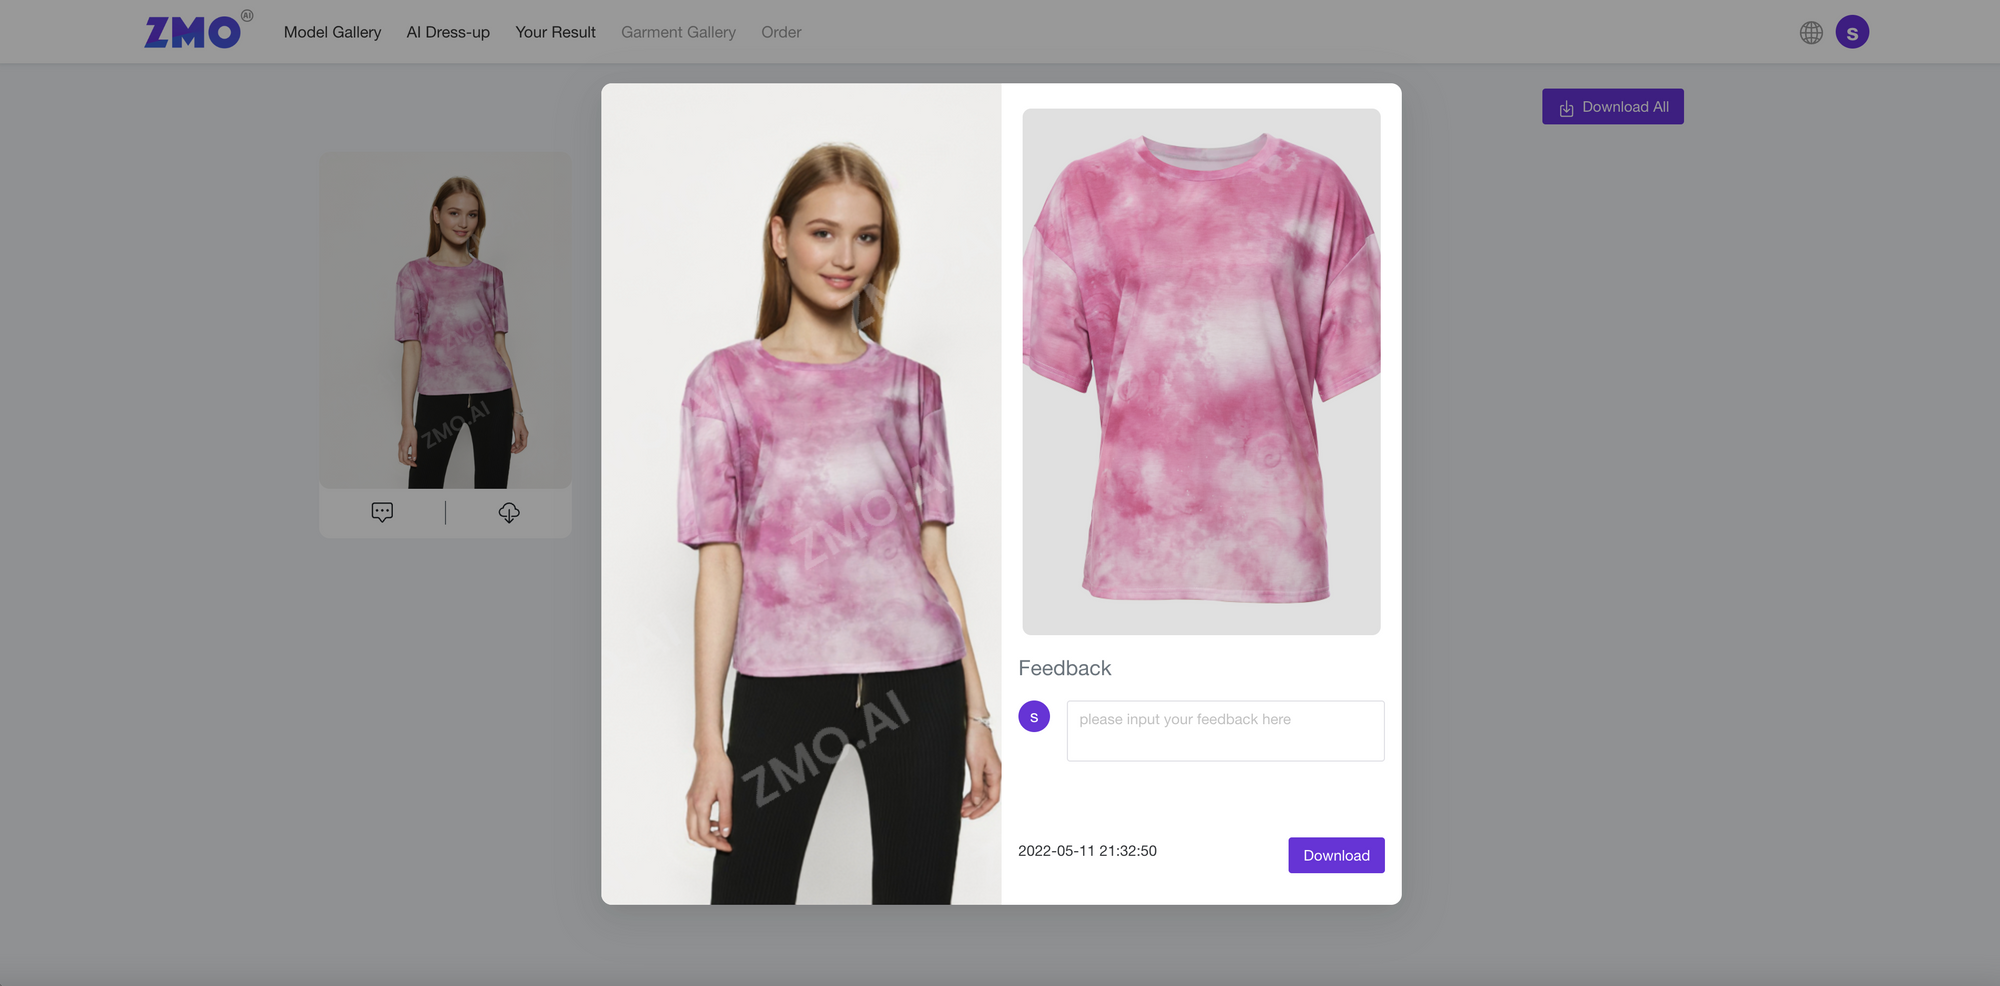 How to Use ZMO.AI to generate on-model images: A Quick Start Guide